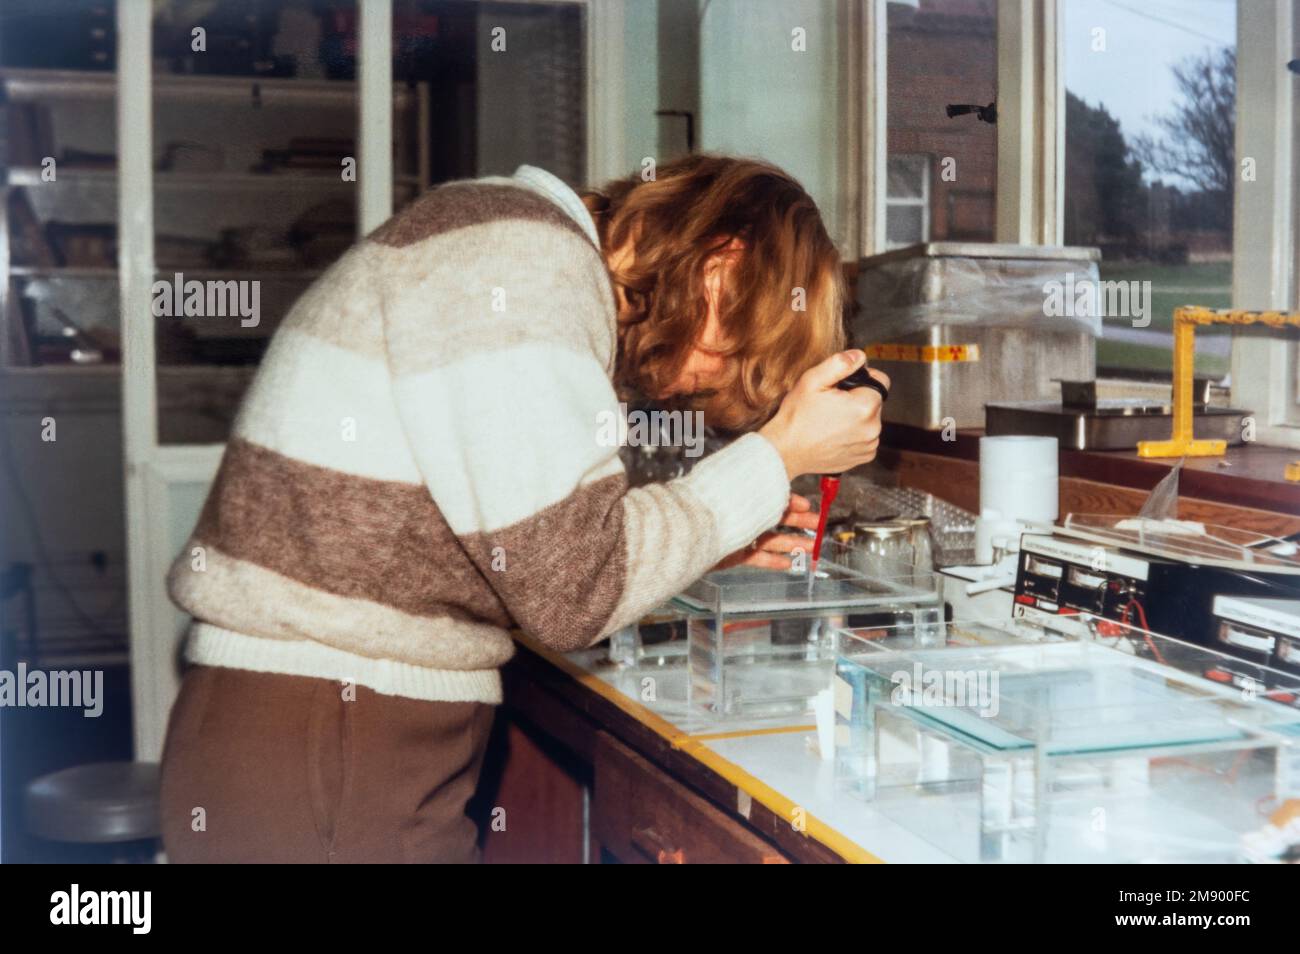 Scientist working in a biochemistry lab laboratory loading DNA samples onto an agarose gel, archival photo from around 1984, England, UK Stock Photo